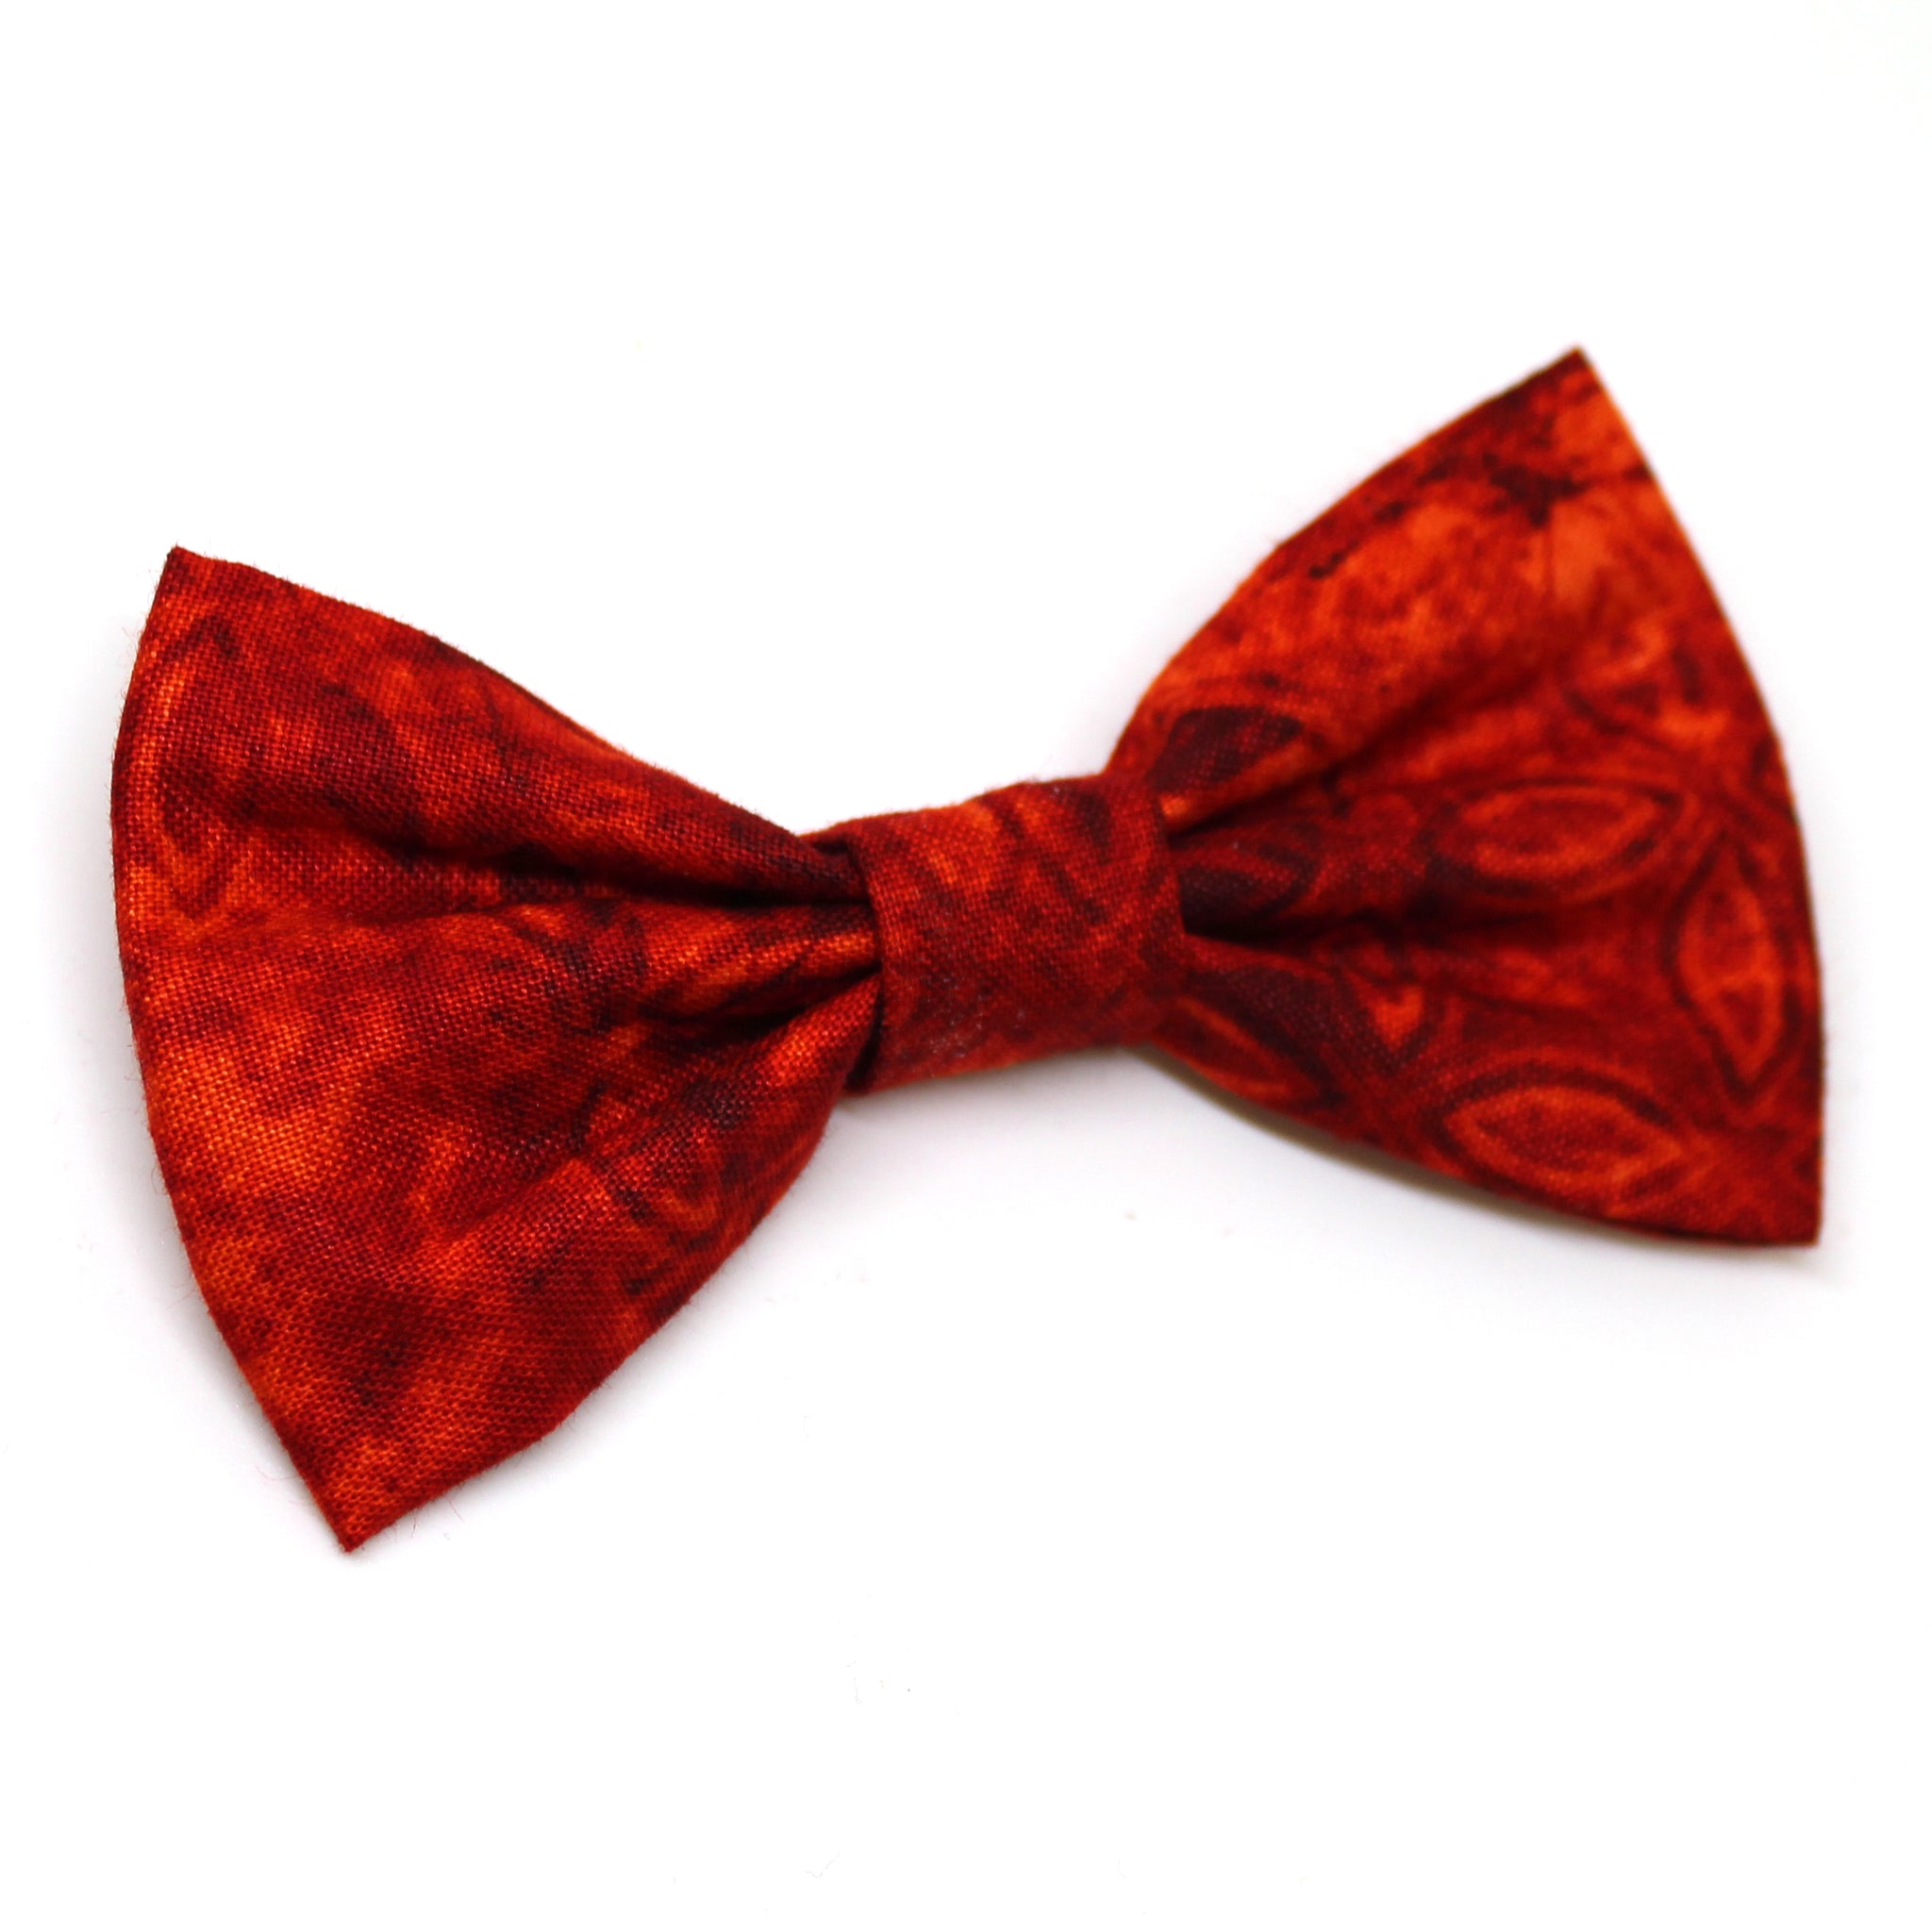 Fire Red Bow Tie